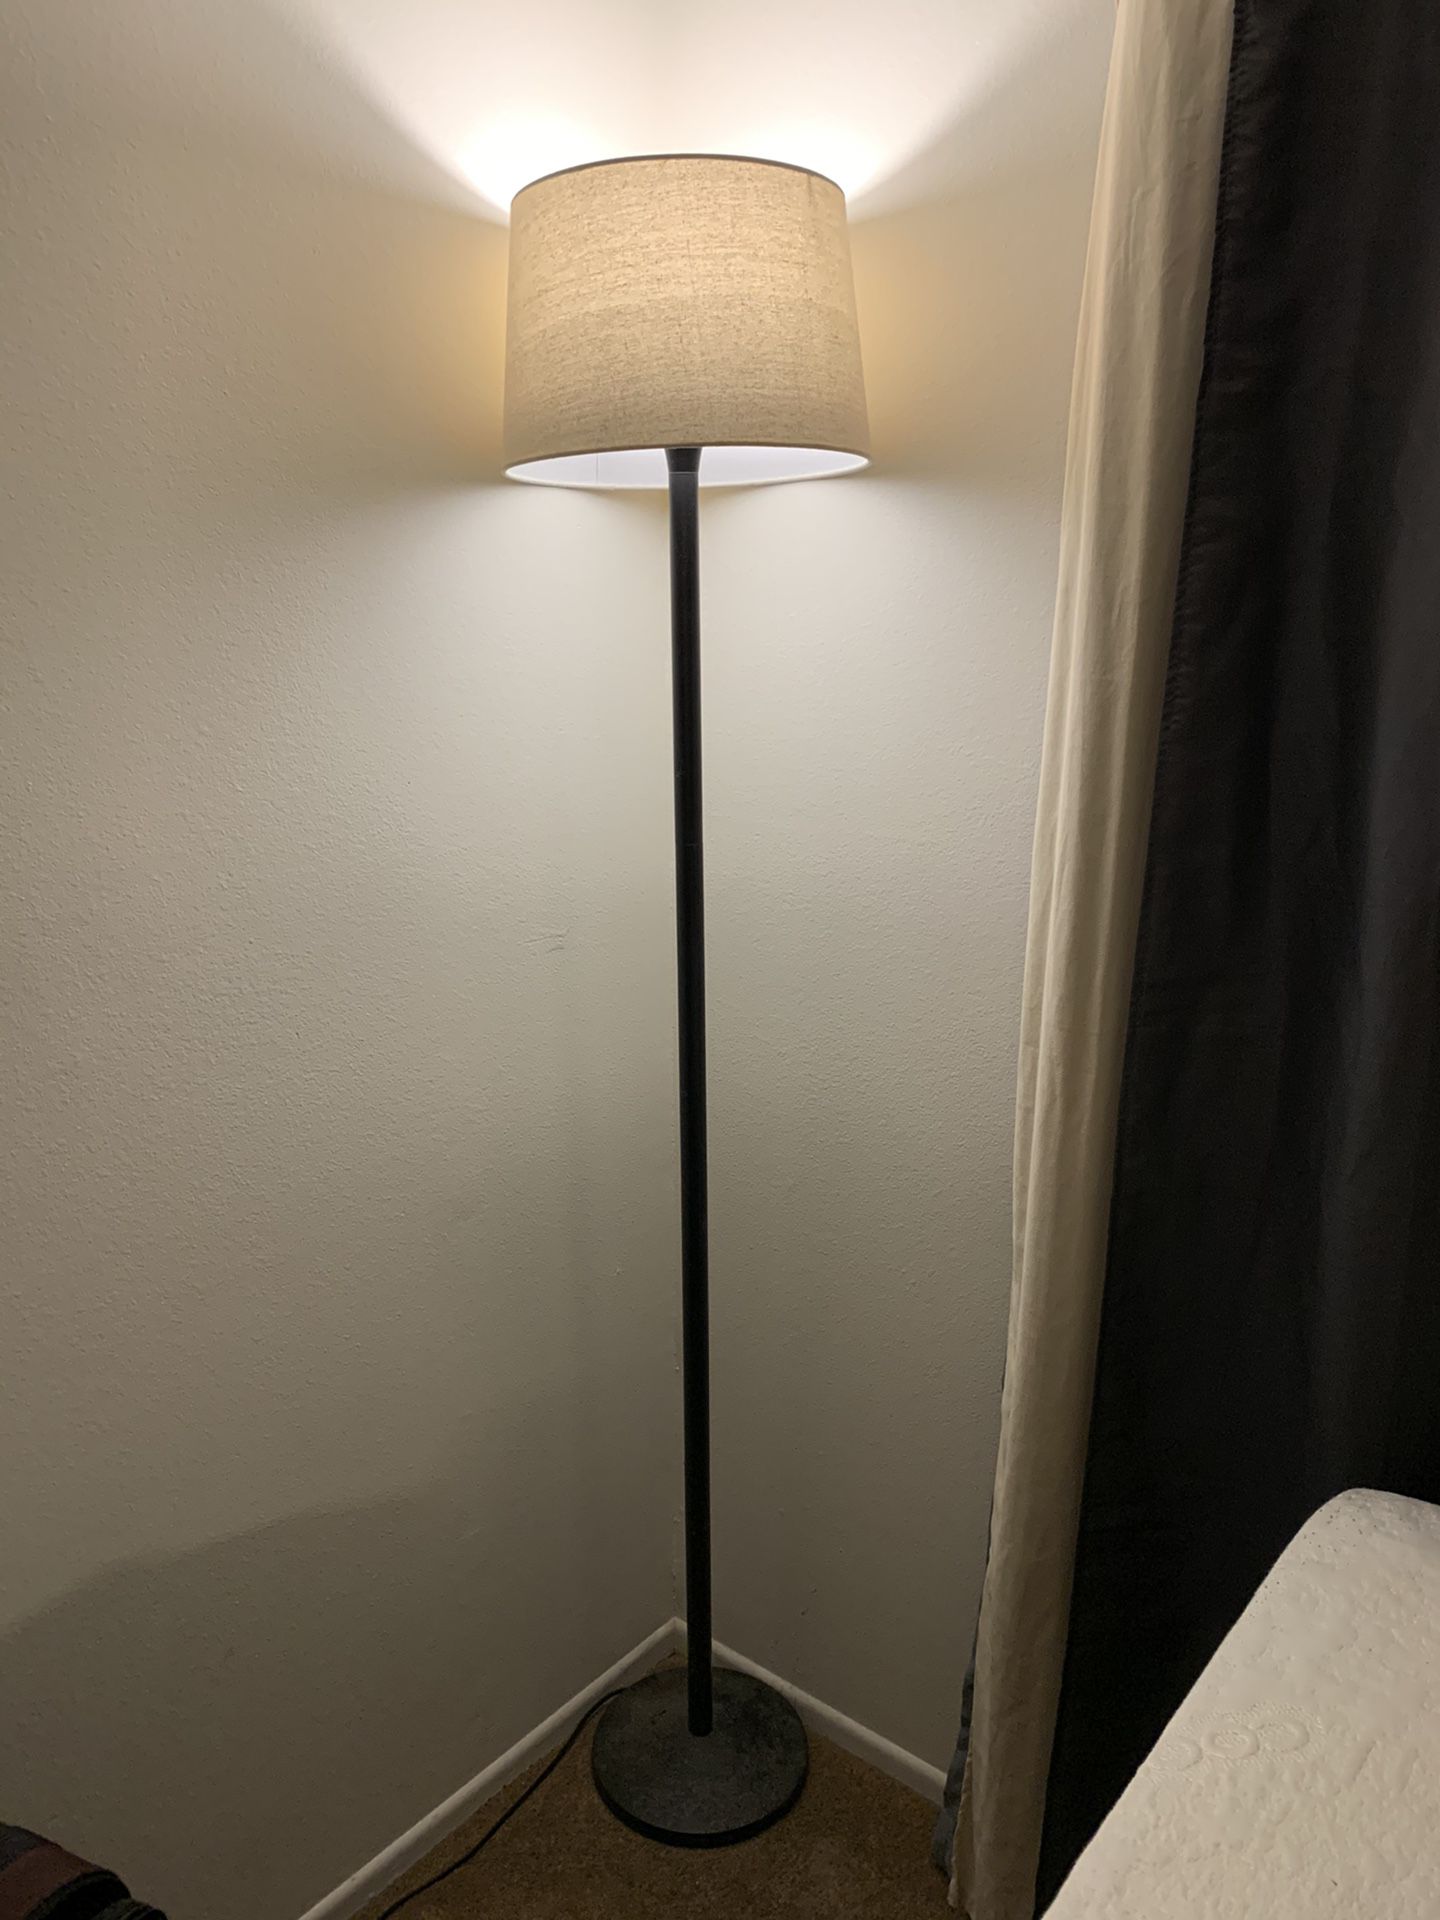 6 ft tall lamp